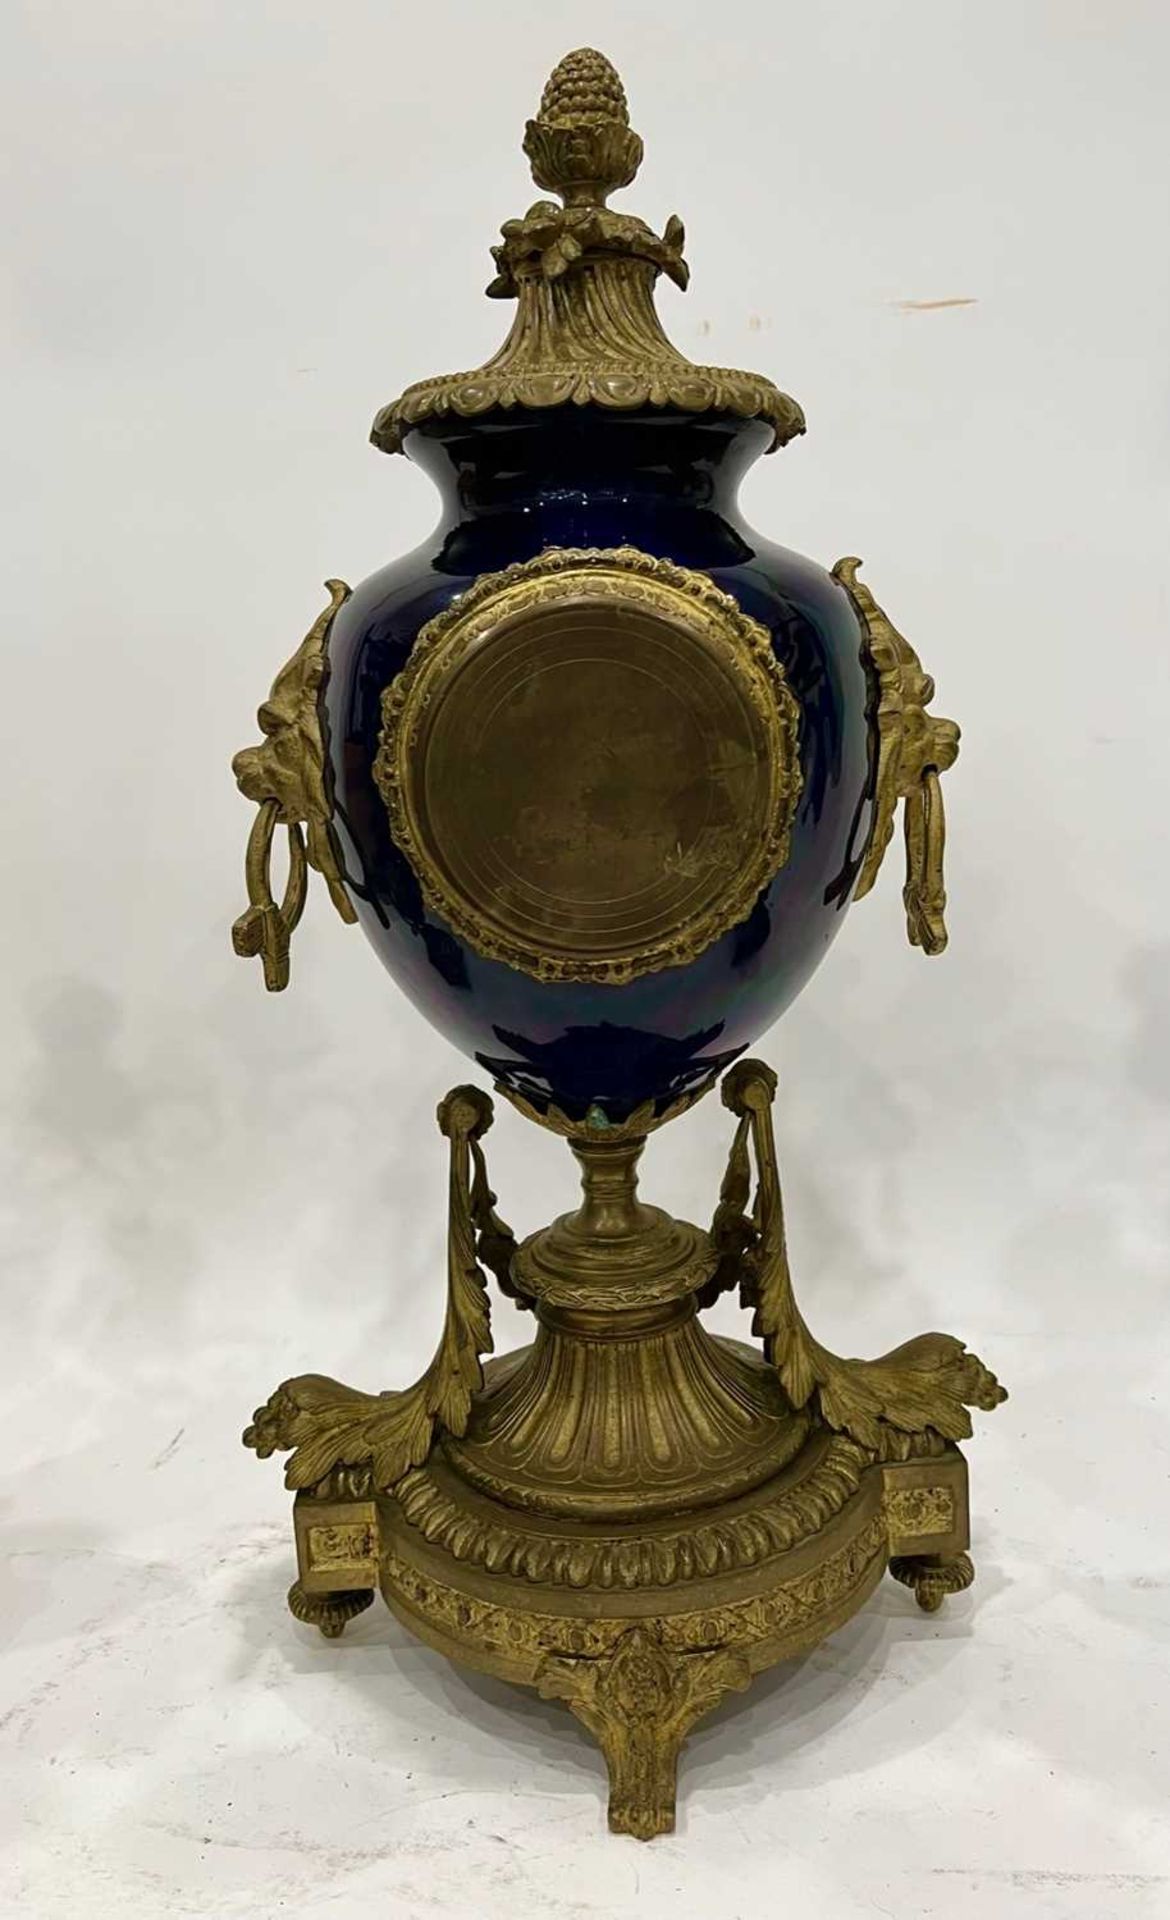 A LATE 19TH CENTURY FRENCH PORCELAIN AND GILT BRONZE MOUNTED CLOCK GARNITURE - Image 4 of 4